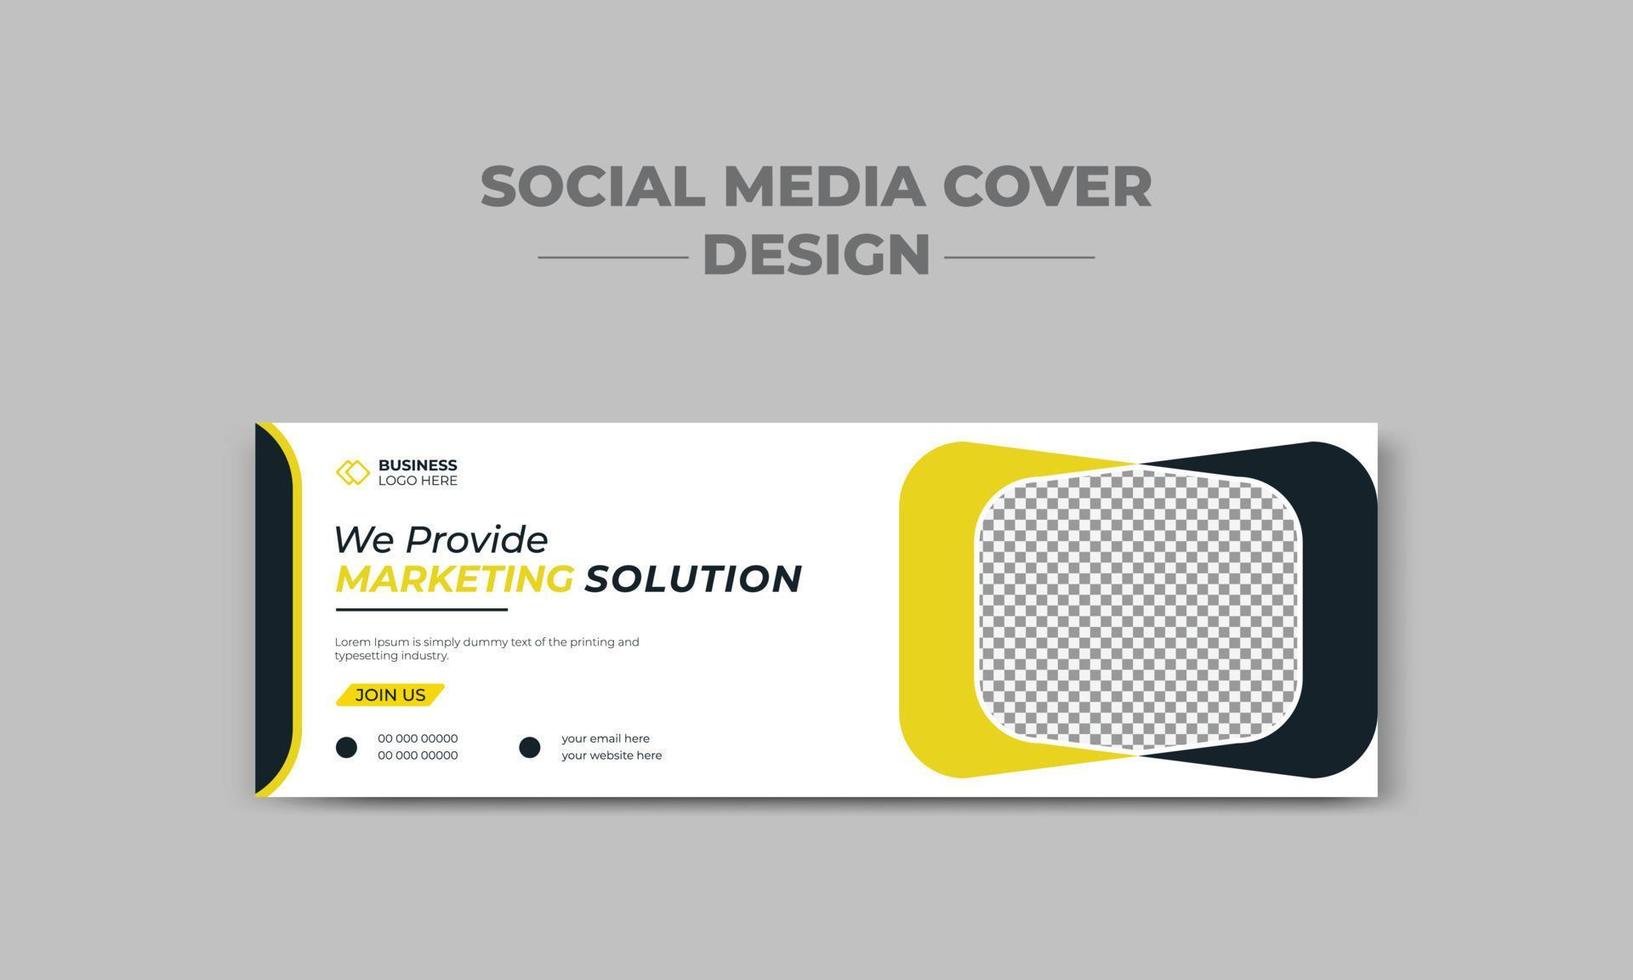 Professional digital marketing agency social media cover and web banner design template vector